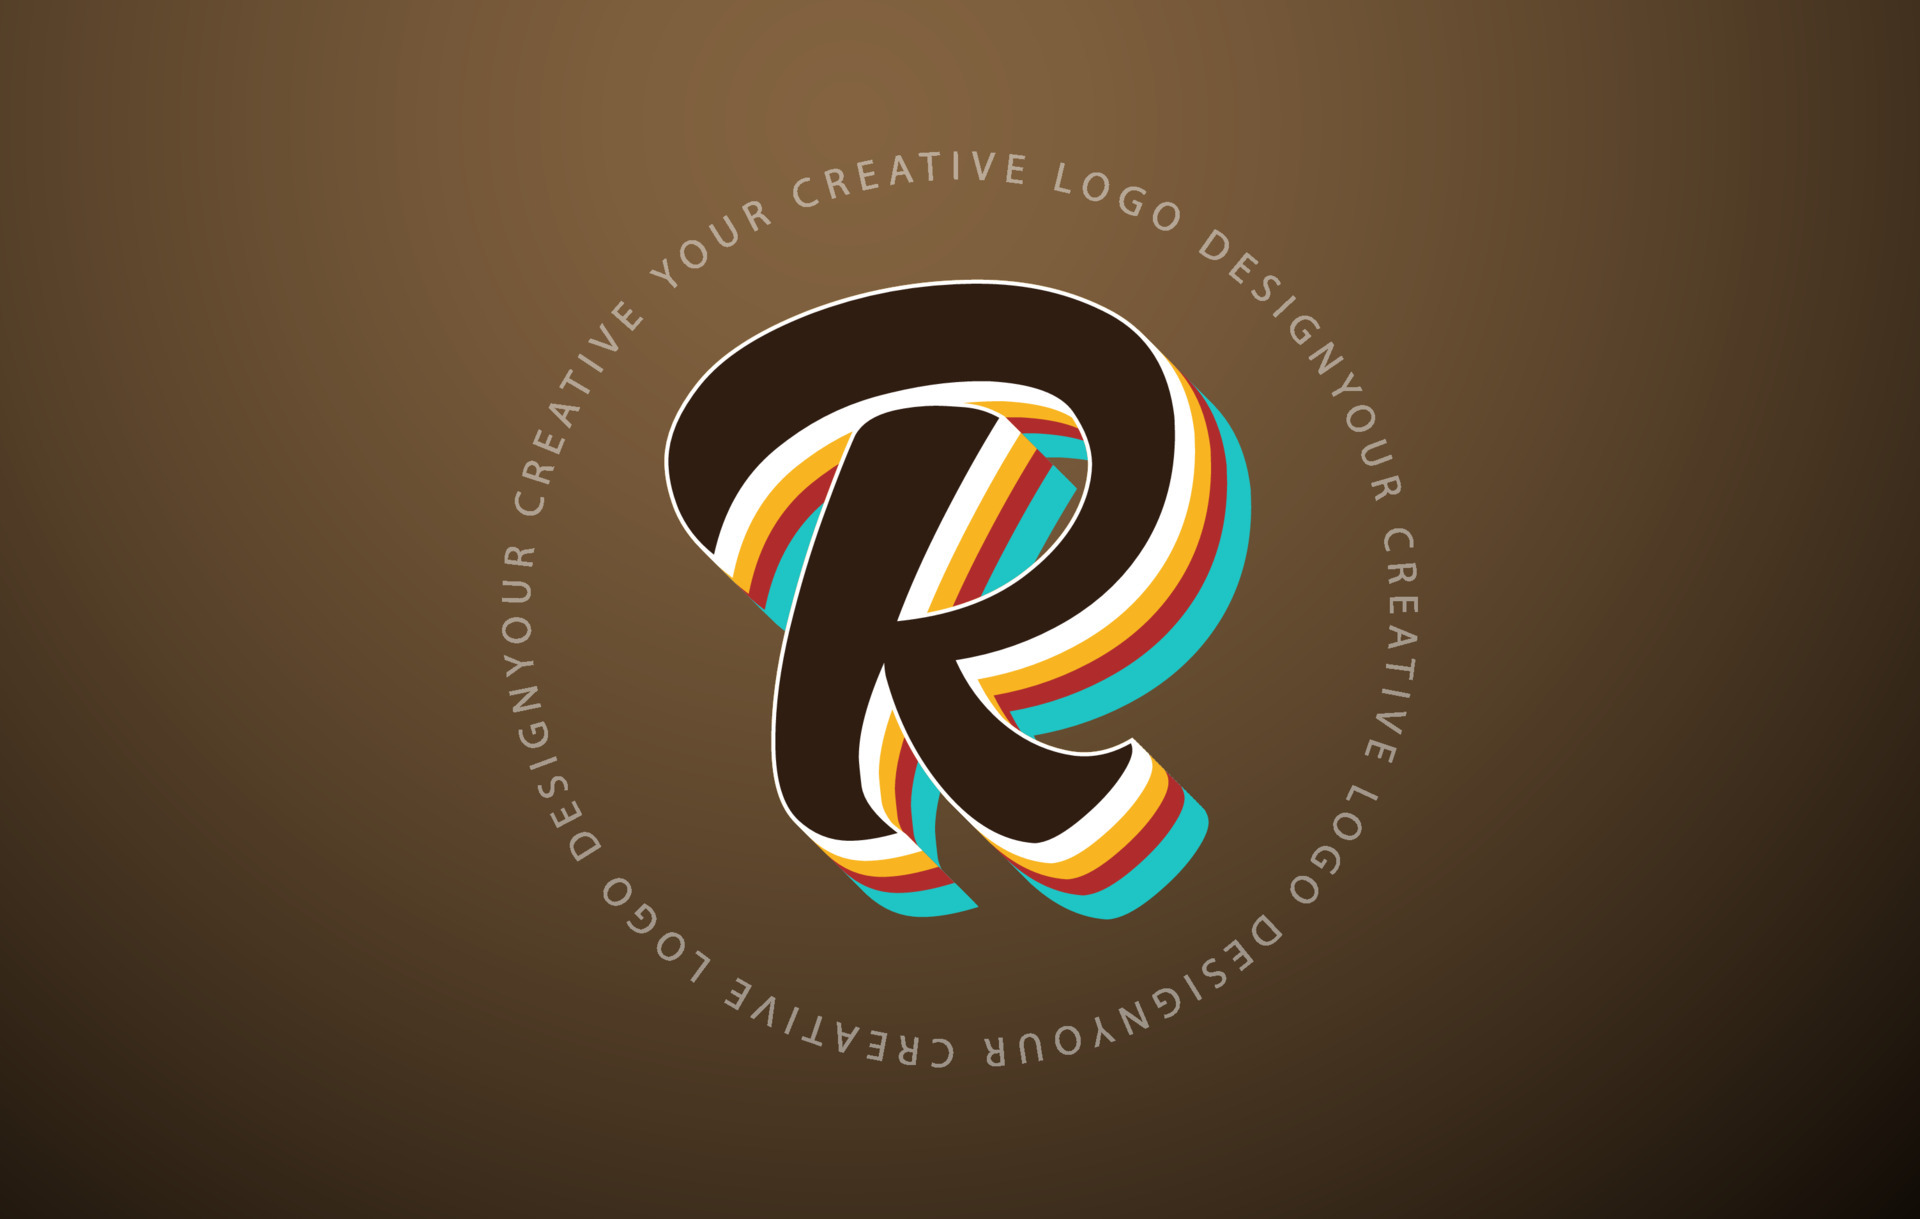 R letter with an abstract pop art logo design Vector Image